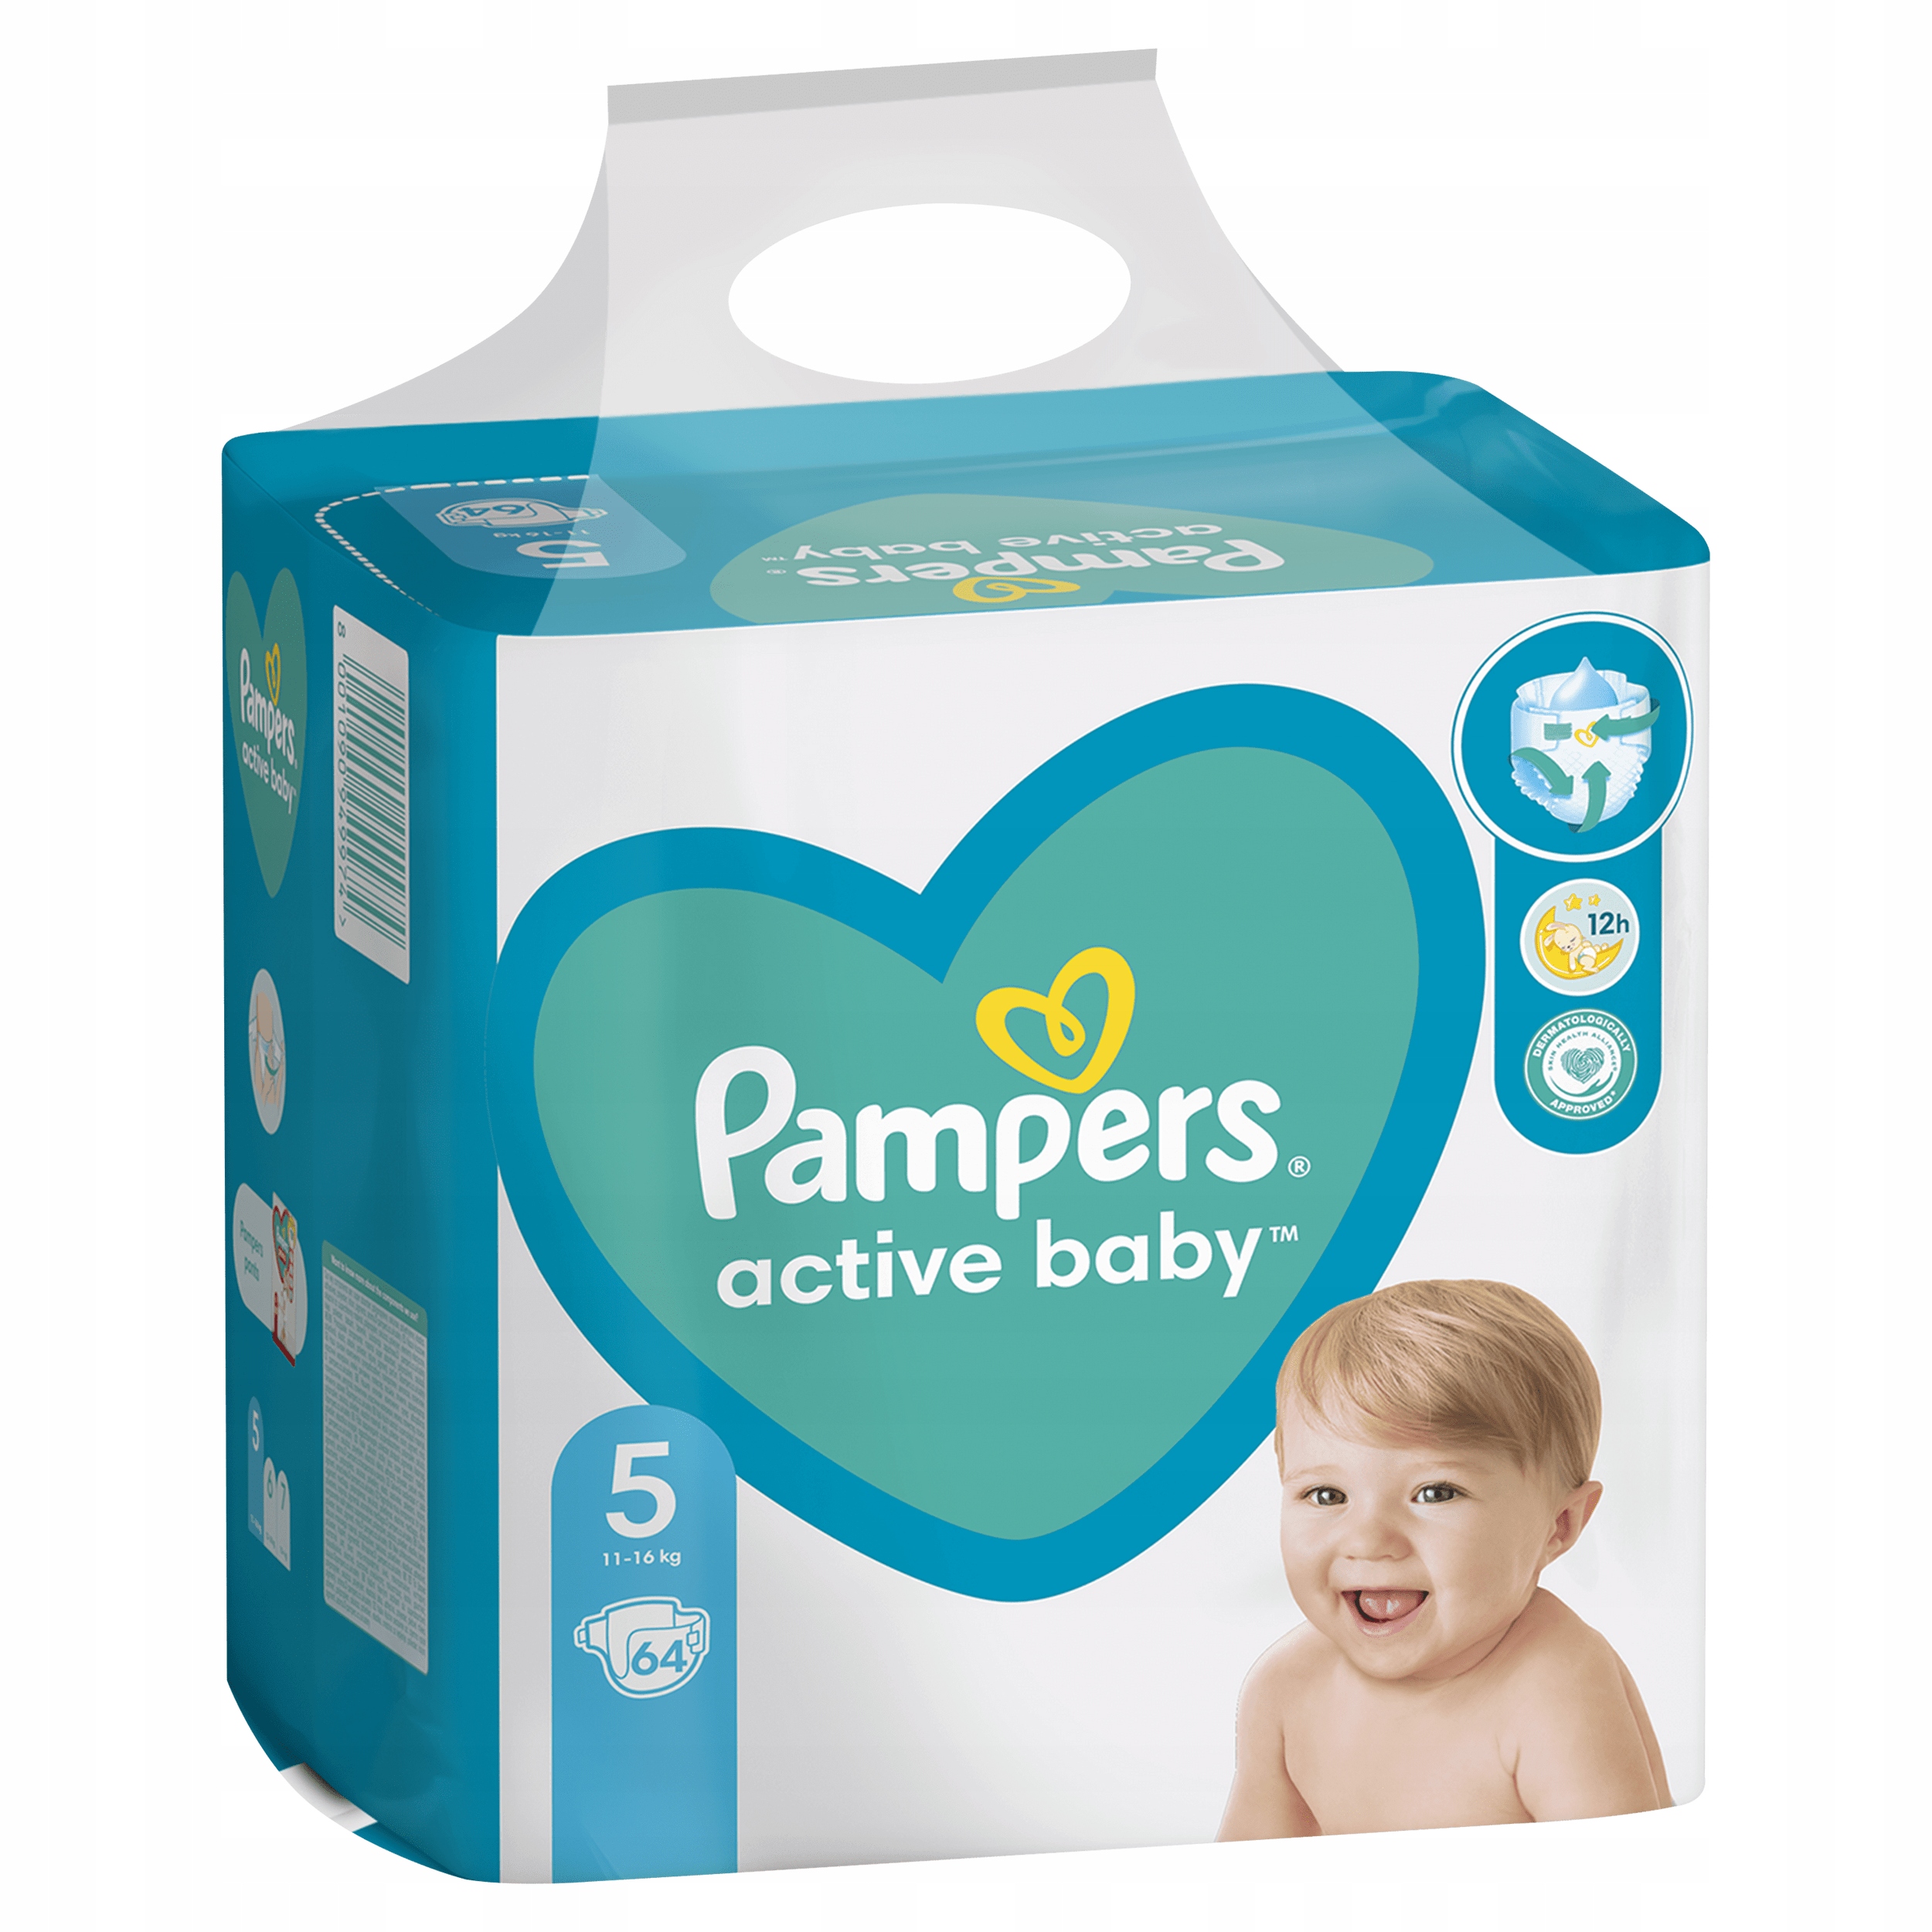 pampers 64 szt